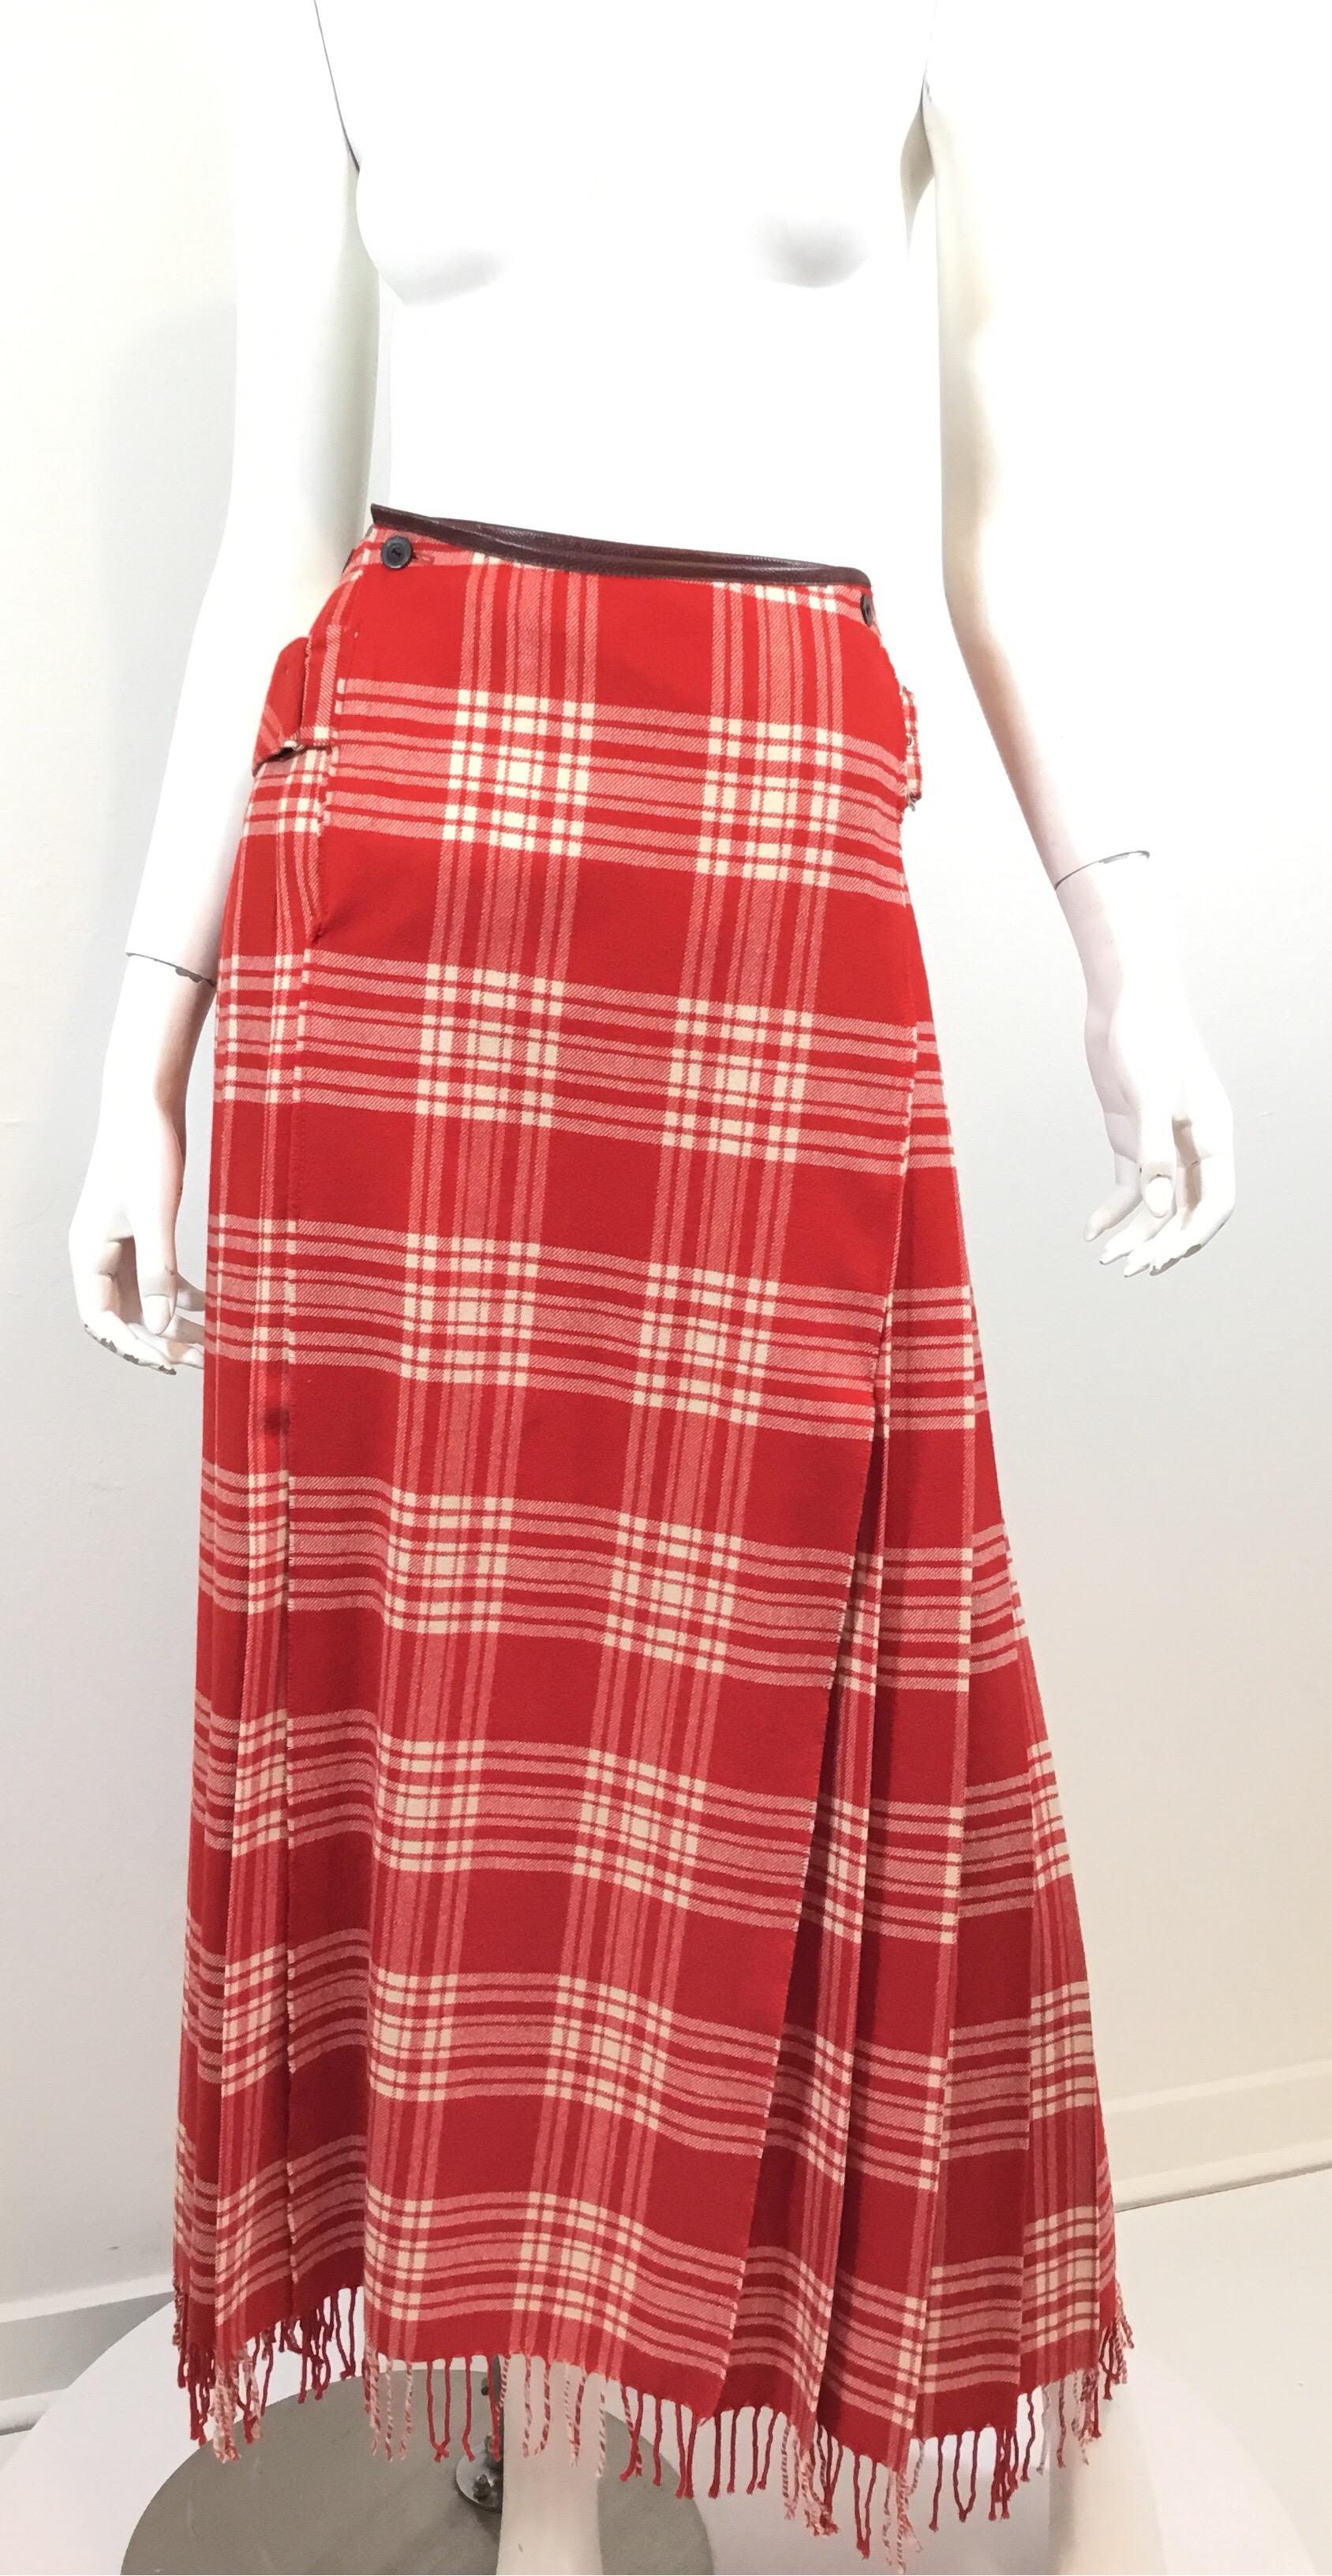 Vintage Jean Paul Gaultier kilt skirt featured in a red plaid with leather trimmings, button and belt fastening, and a fringed hem. Skirt is labeled a size 44 and composed of 100% wool. Made in Italy.

Waist 26”, hips 34”, length 39”